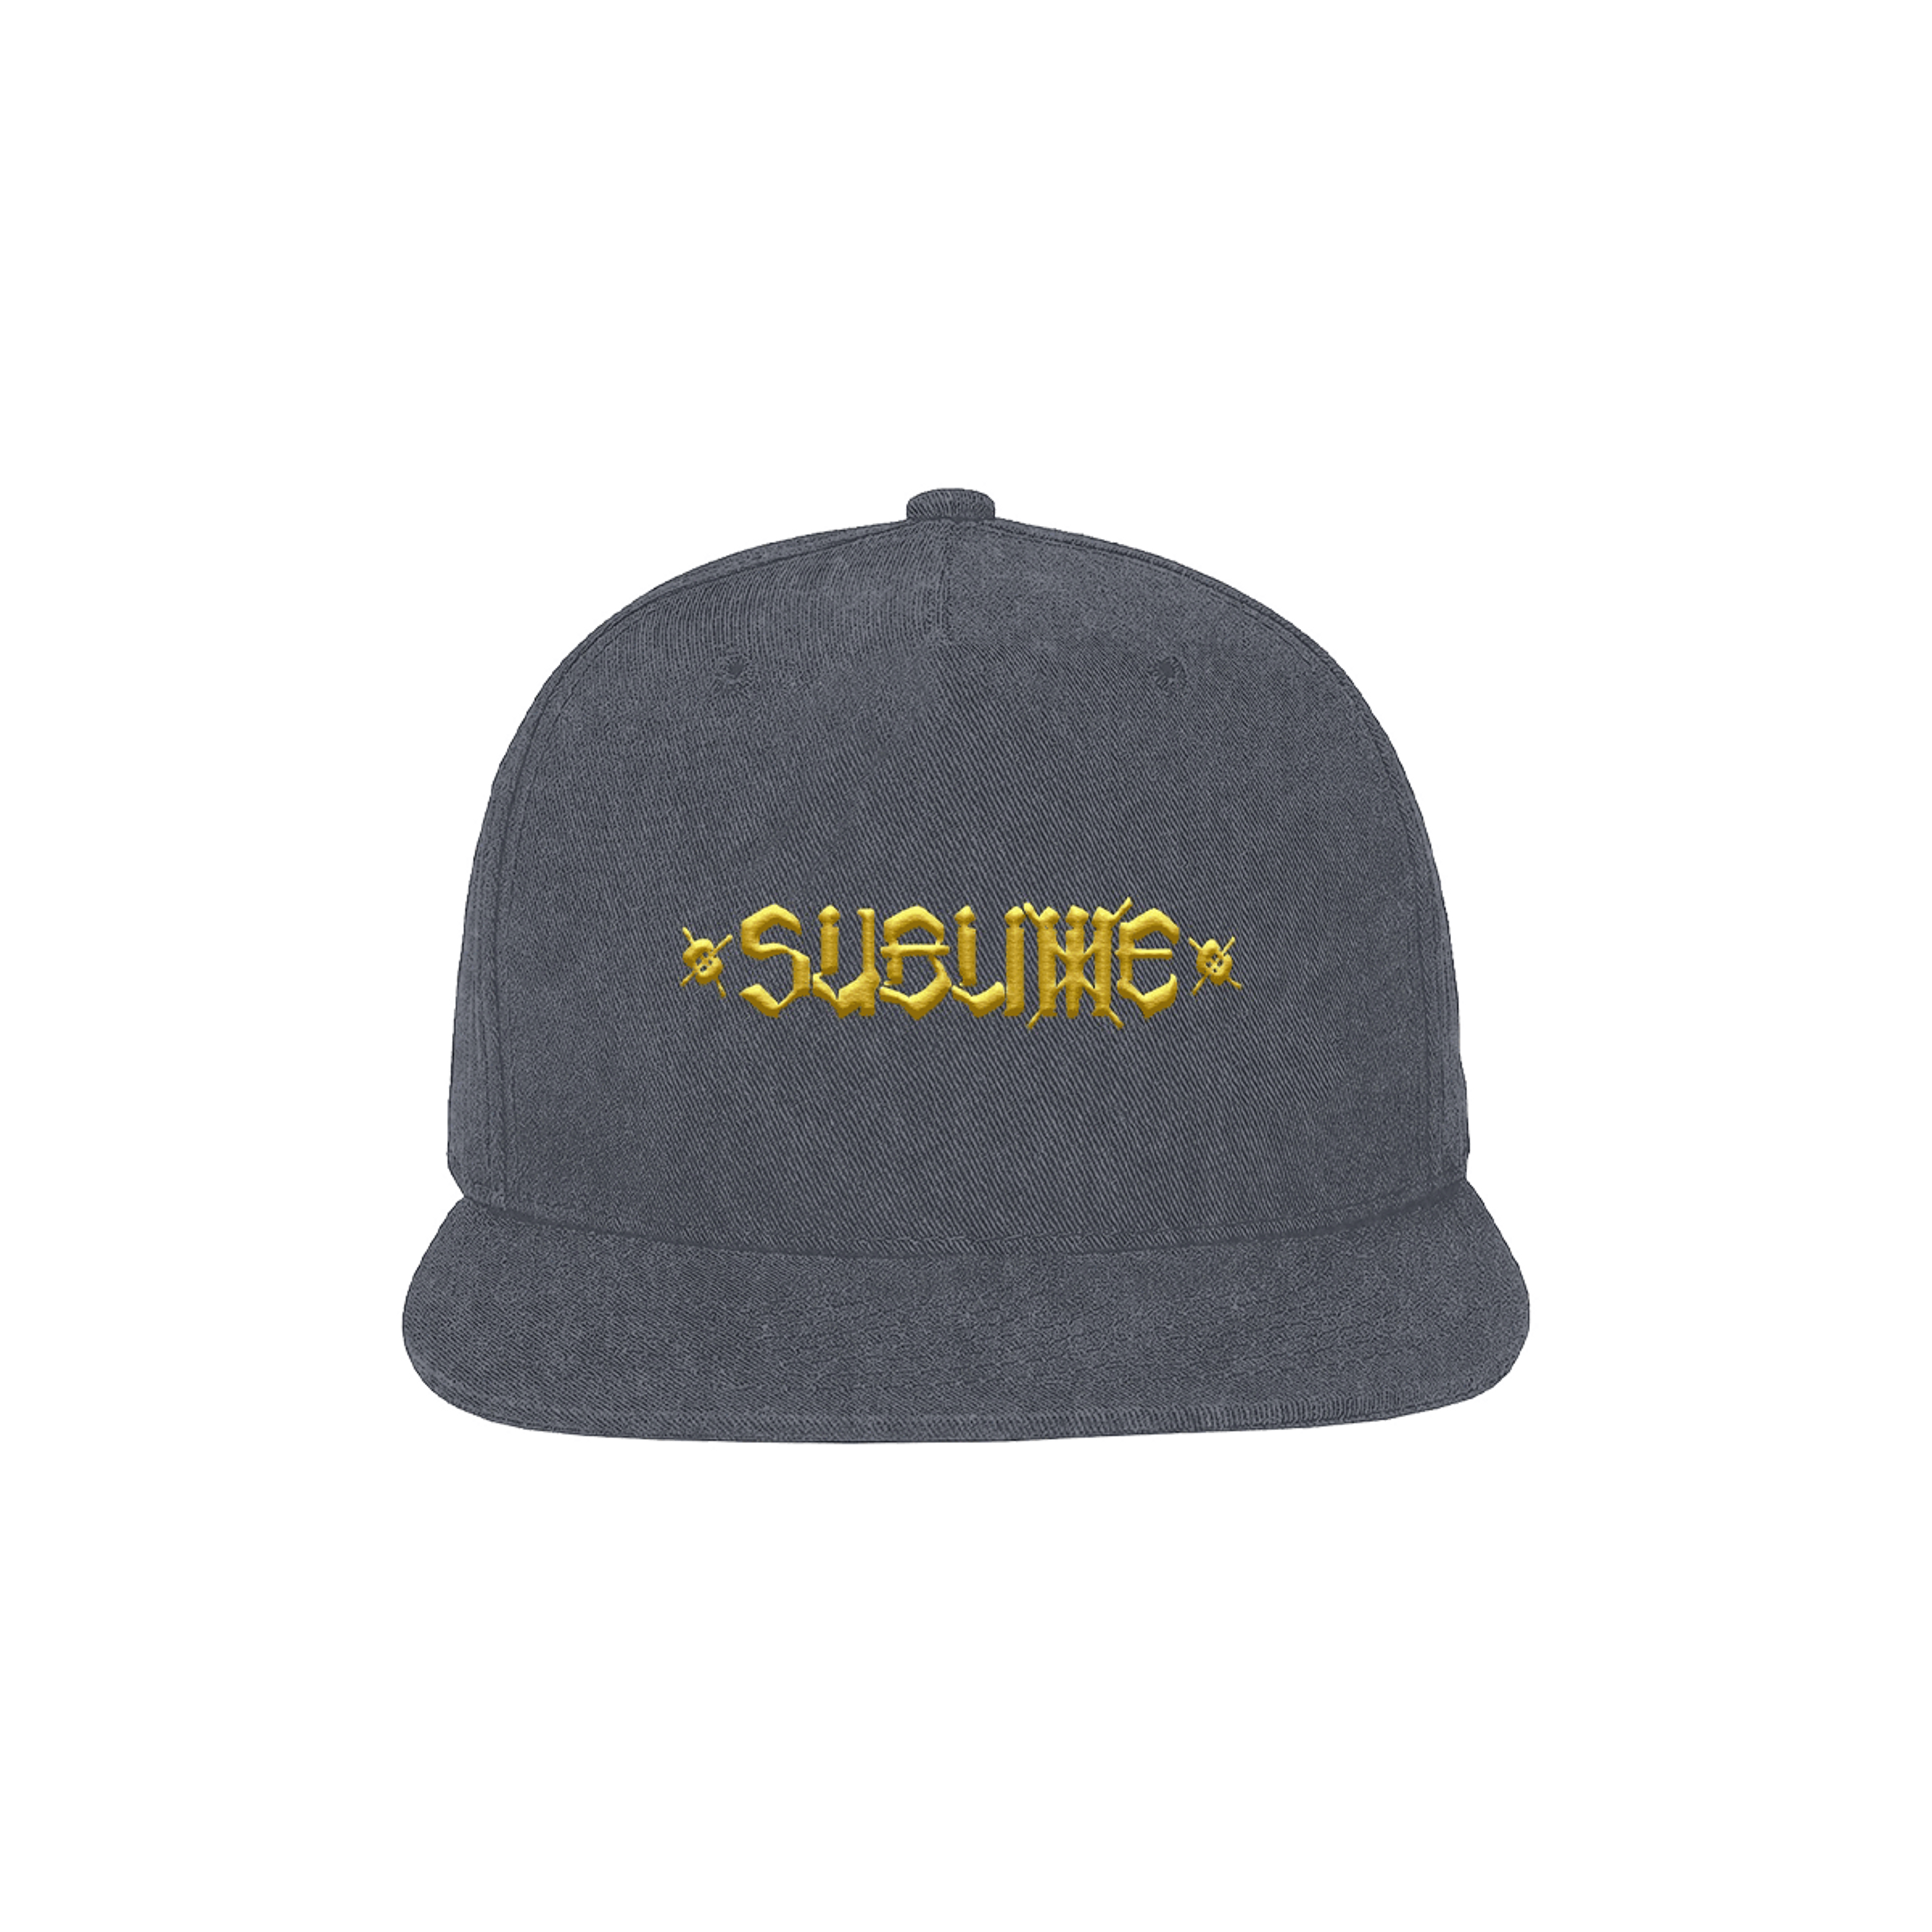 Sublime x Chaz 3D Embroidered Snapback - Grey